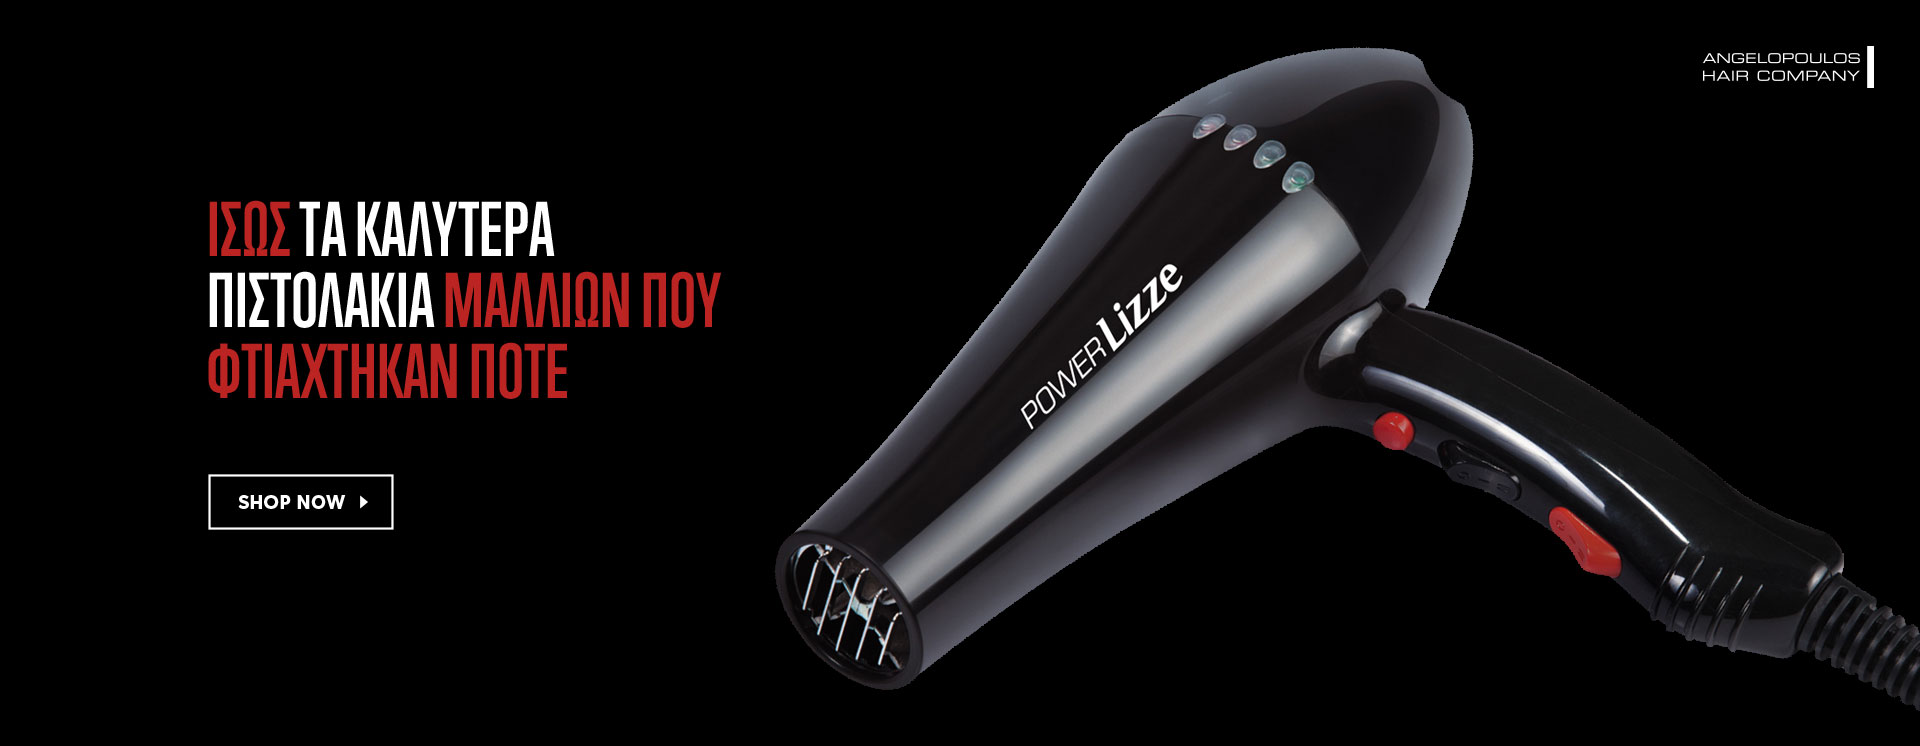 Hair Dryers - Christmas Limited Edition